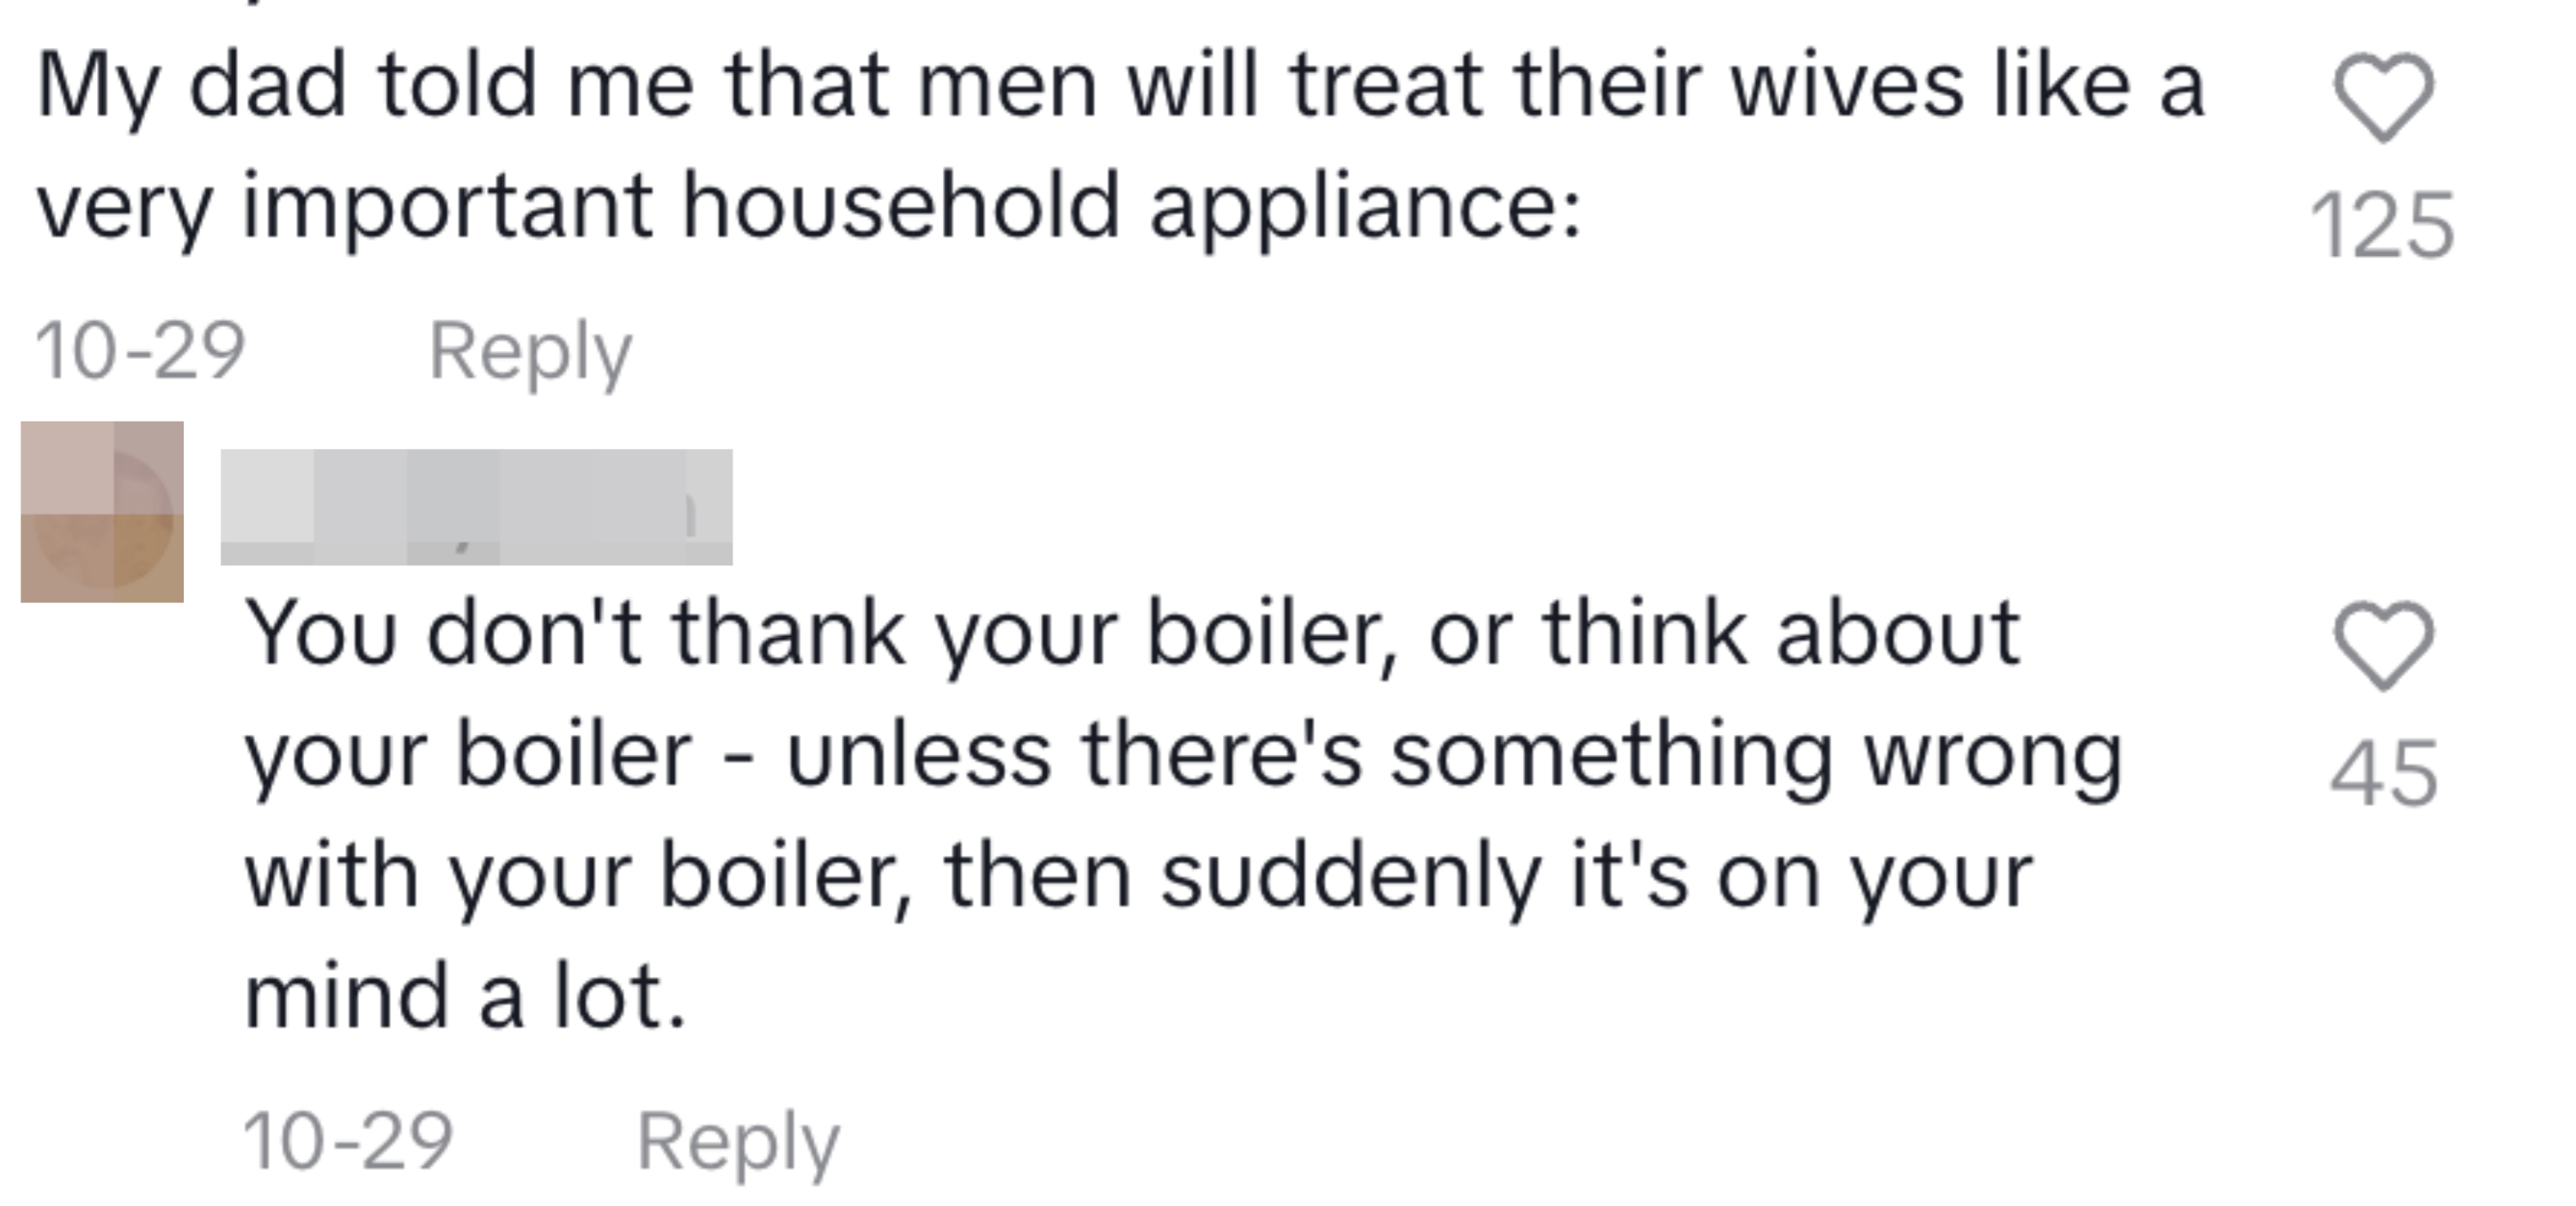 my dad told me that men will treat their wives like a very important household appliance. You don&#x27;t thank your boiler or think about your boiler unless there&#x27;s something wrong with it